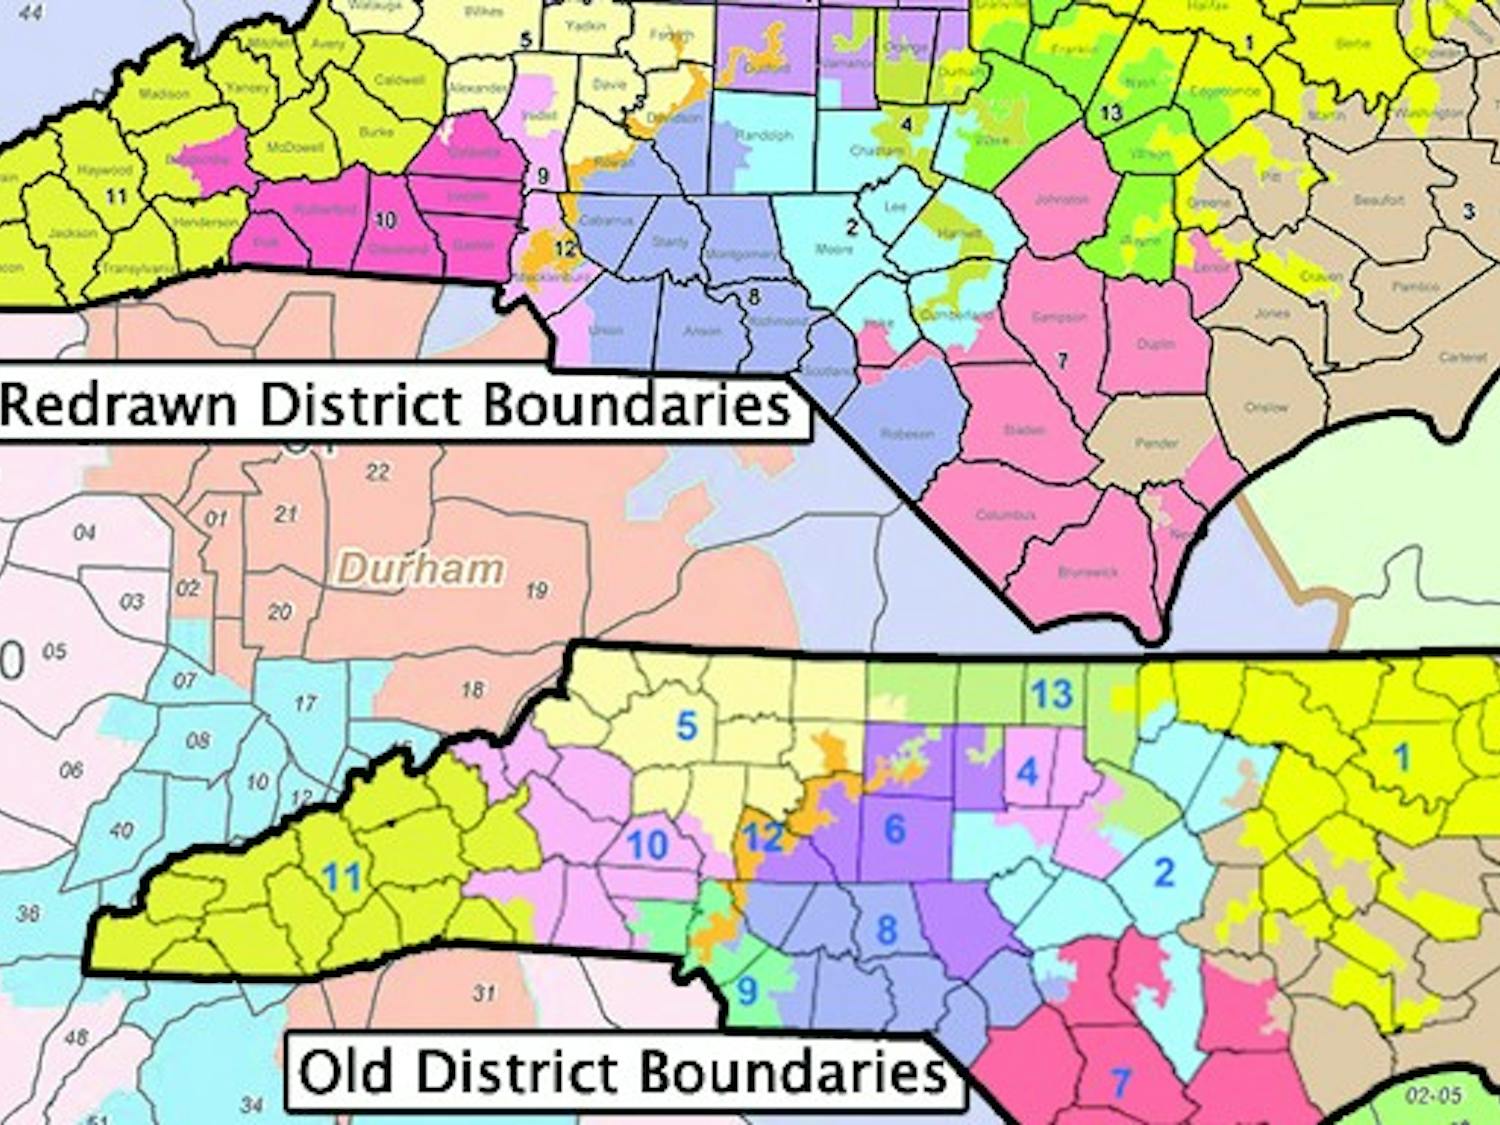 The N.C. General Assembly passed legislation in July that redraws the boundaries of the state’s 13 congressional districts. Some groups, however, have criticized the legislation, contending that the new boundaries are partisan.